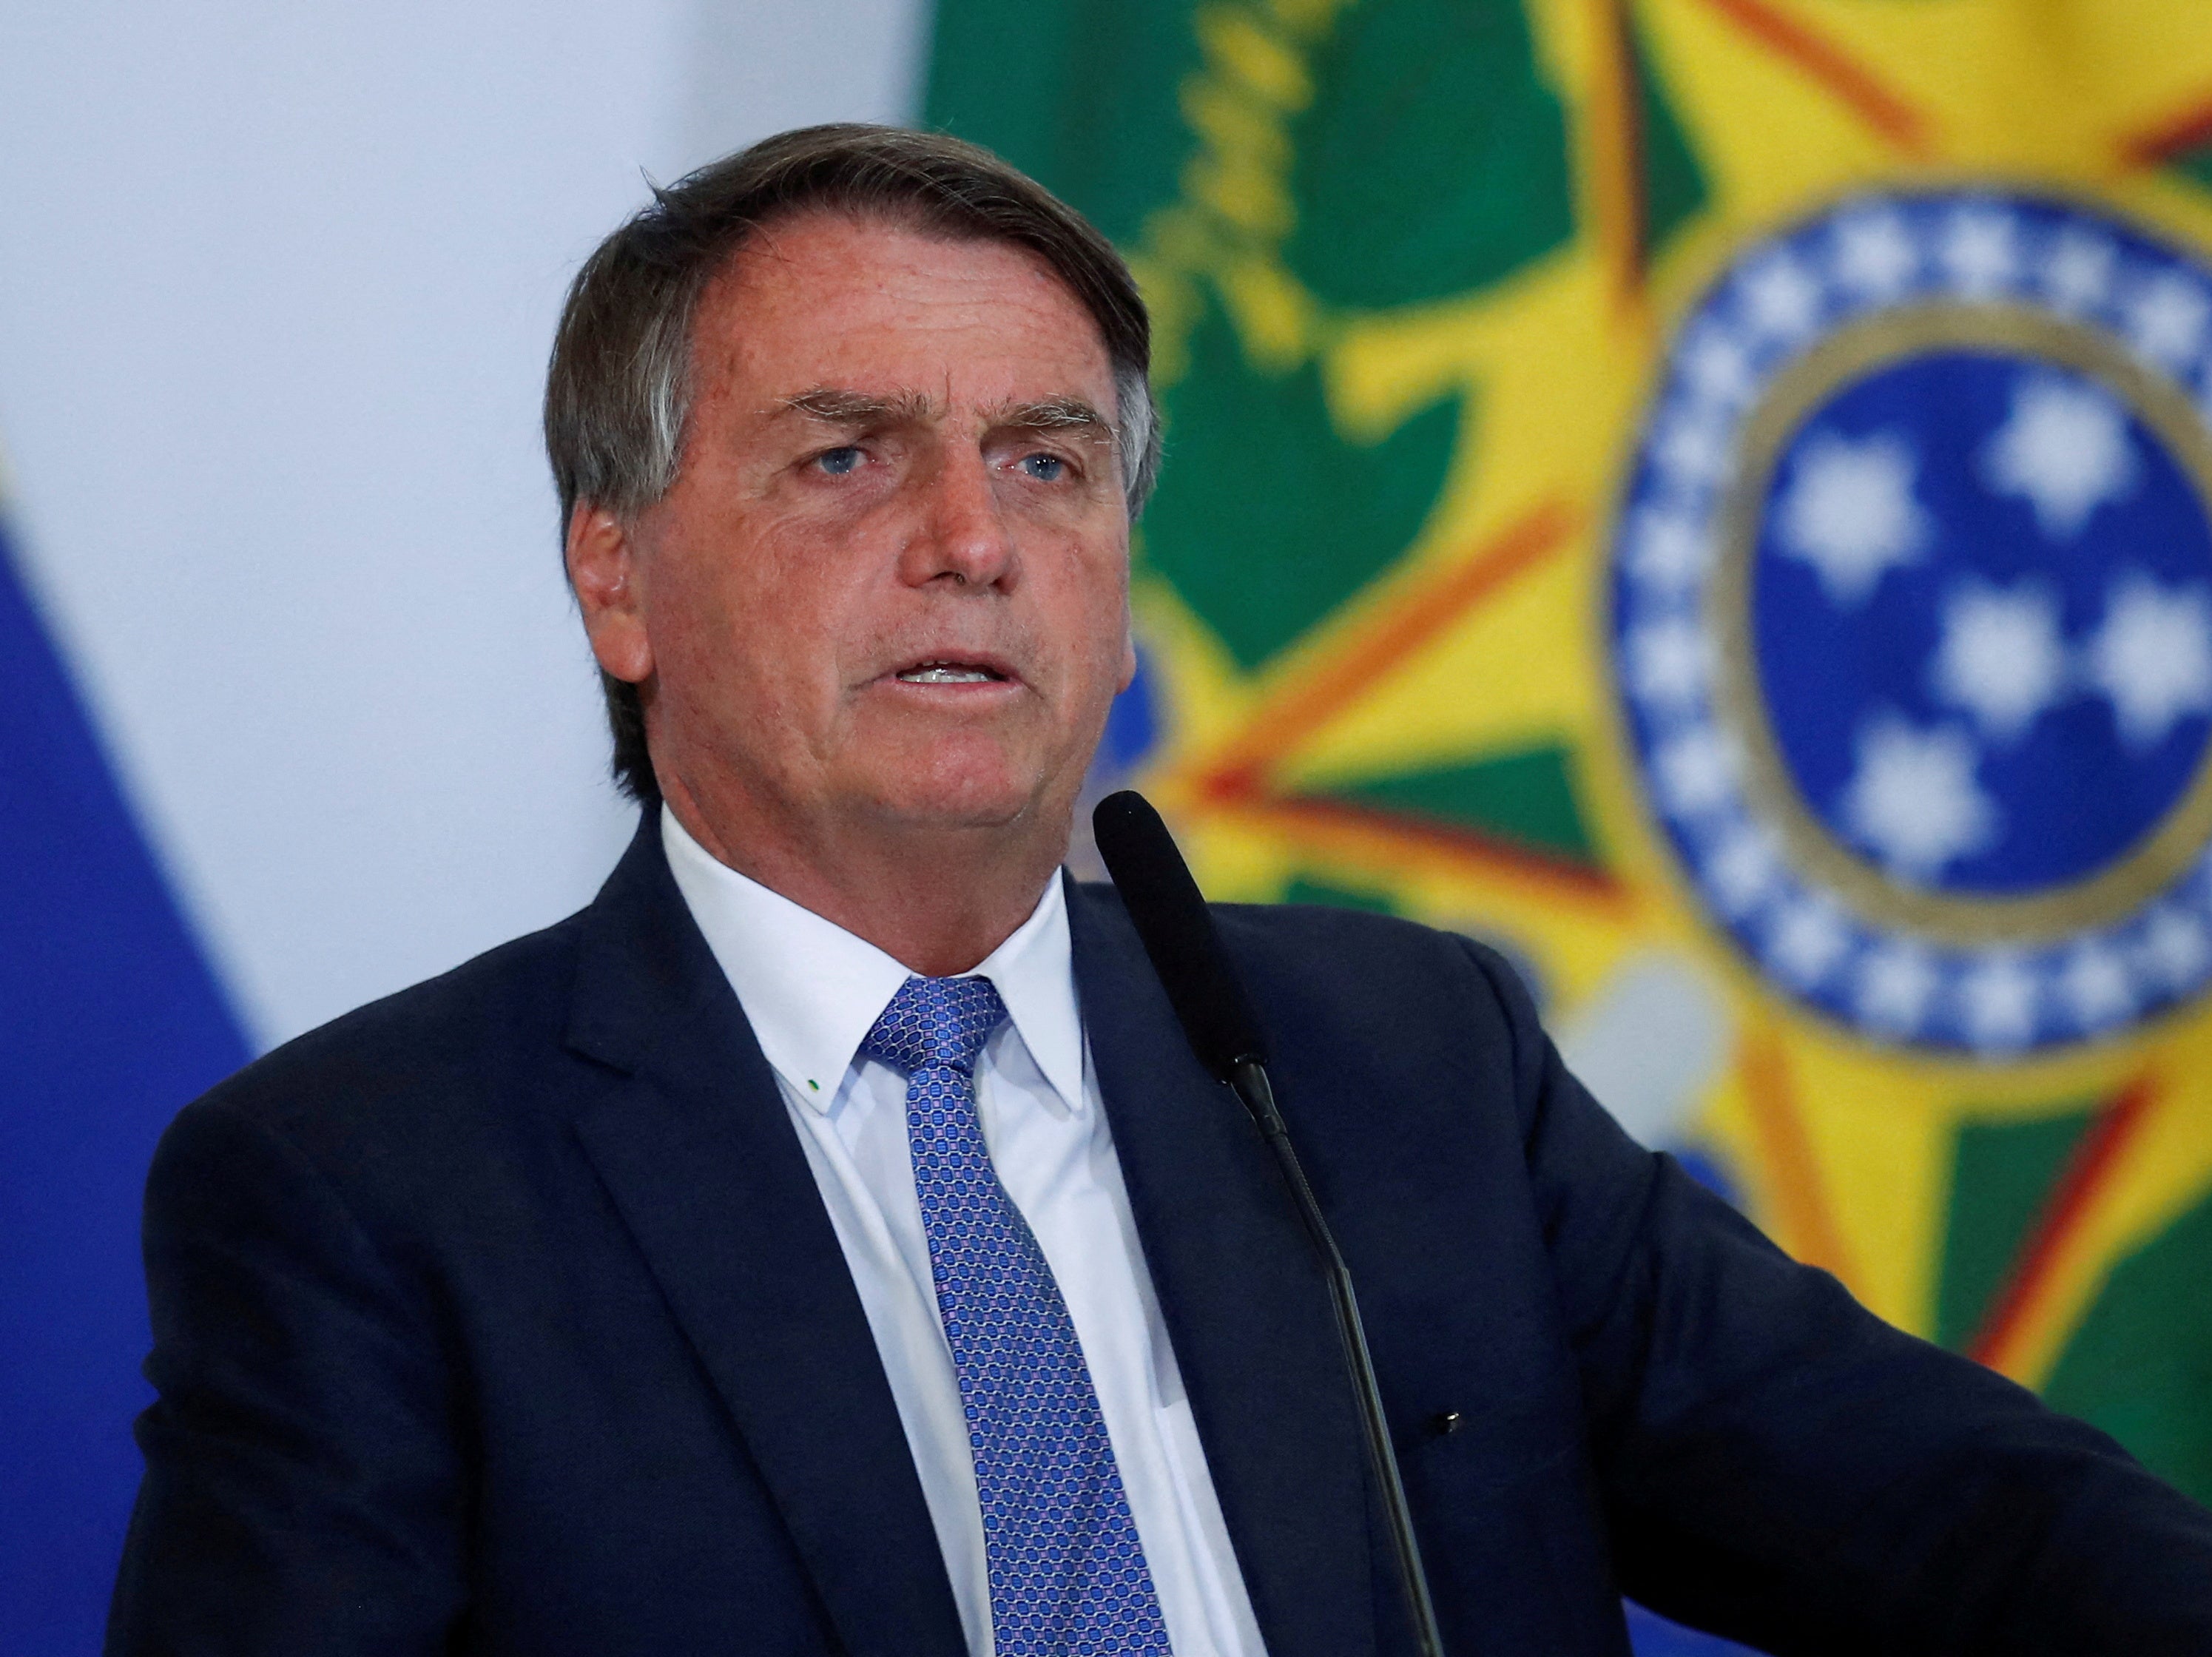 Jair Bolsonaro has hit back at actor Leonardo DiCaprio after he called on Brazilian youth to vote in the country’s elections